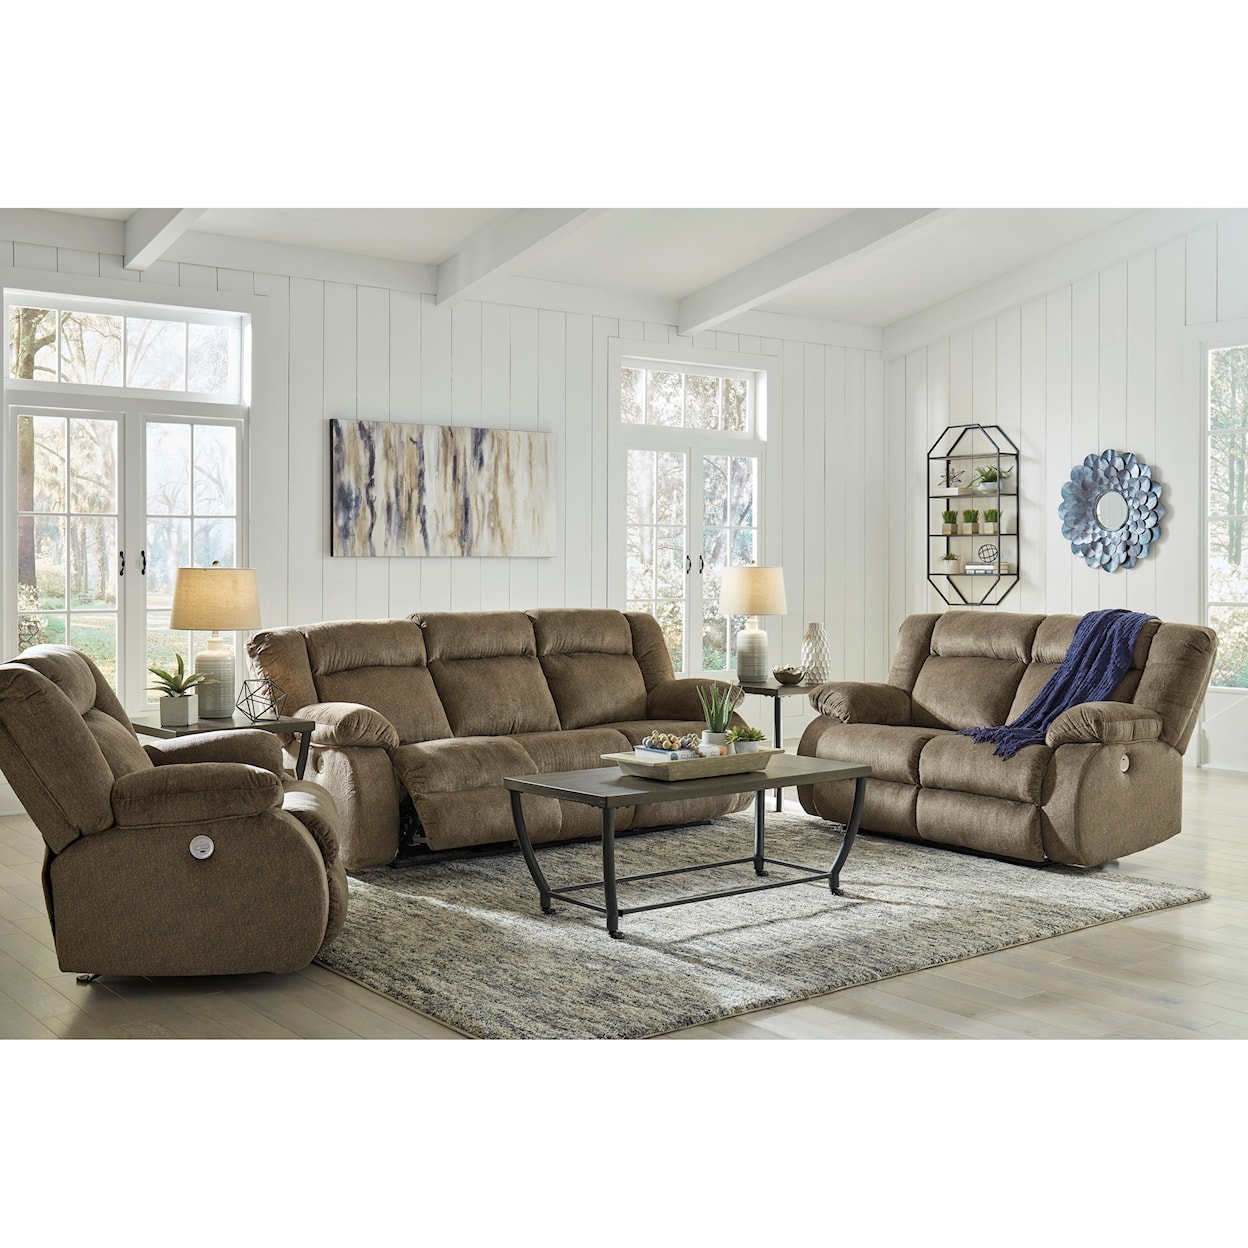 Signature Design by Ashley Burkner Power Reclining Living Room Group